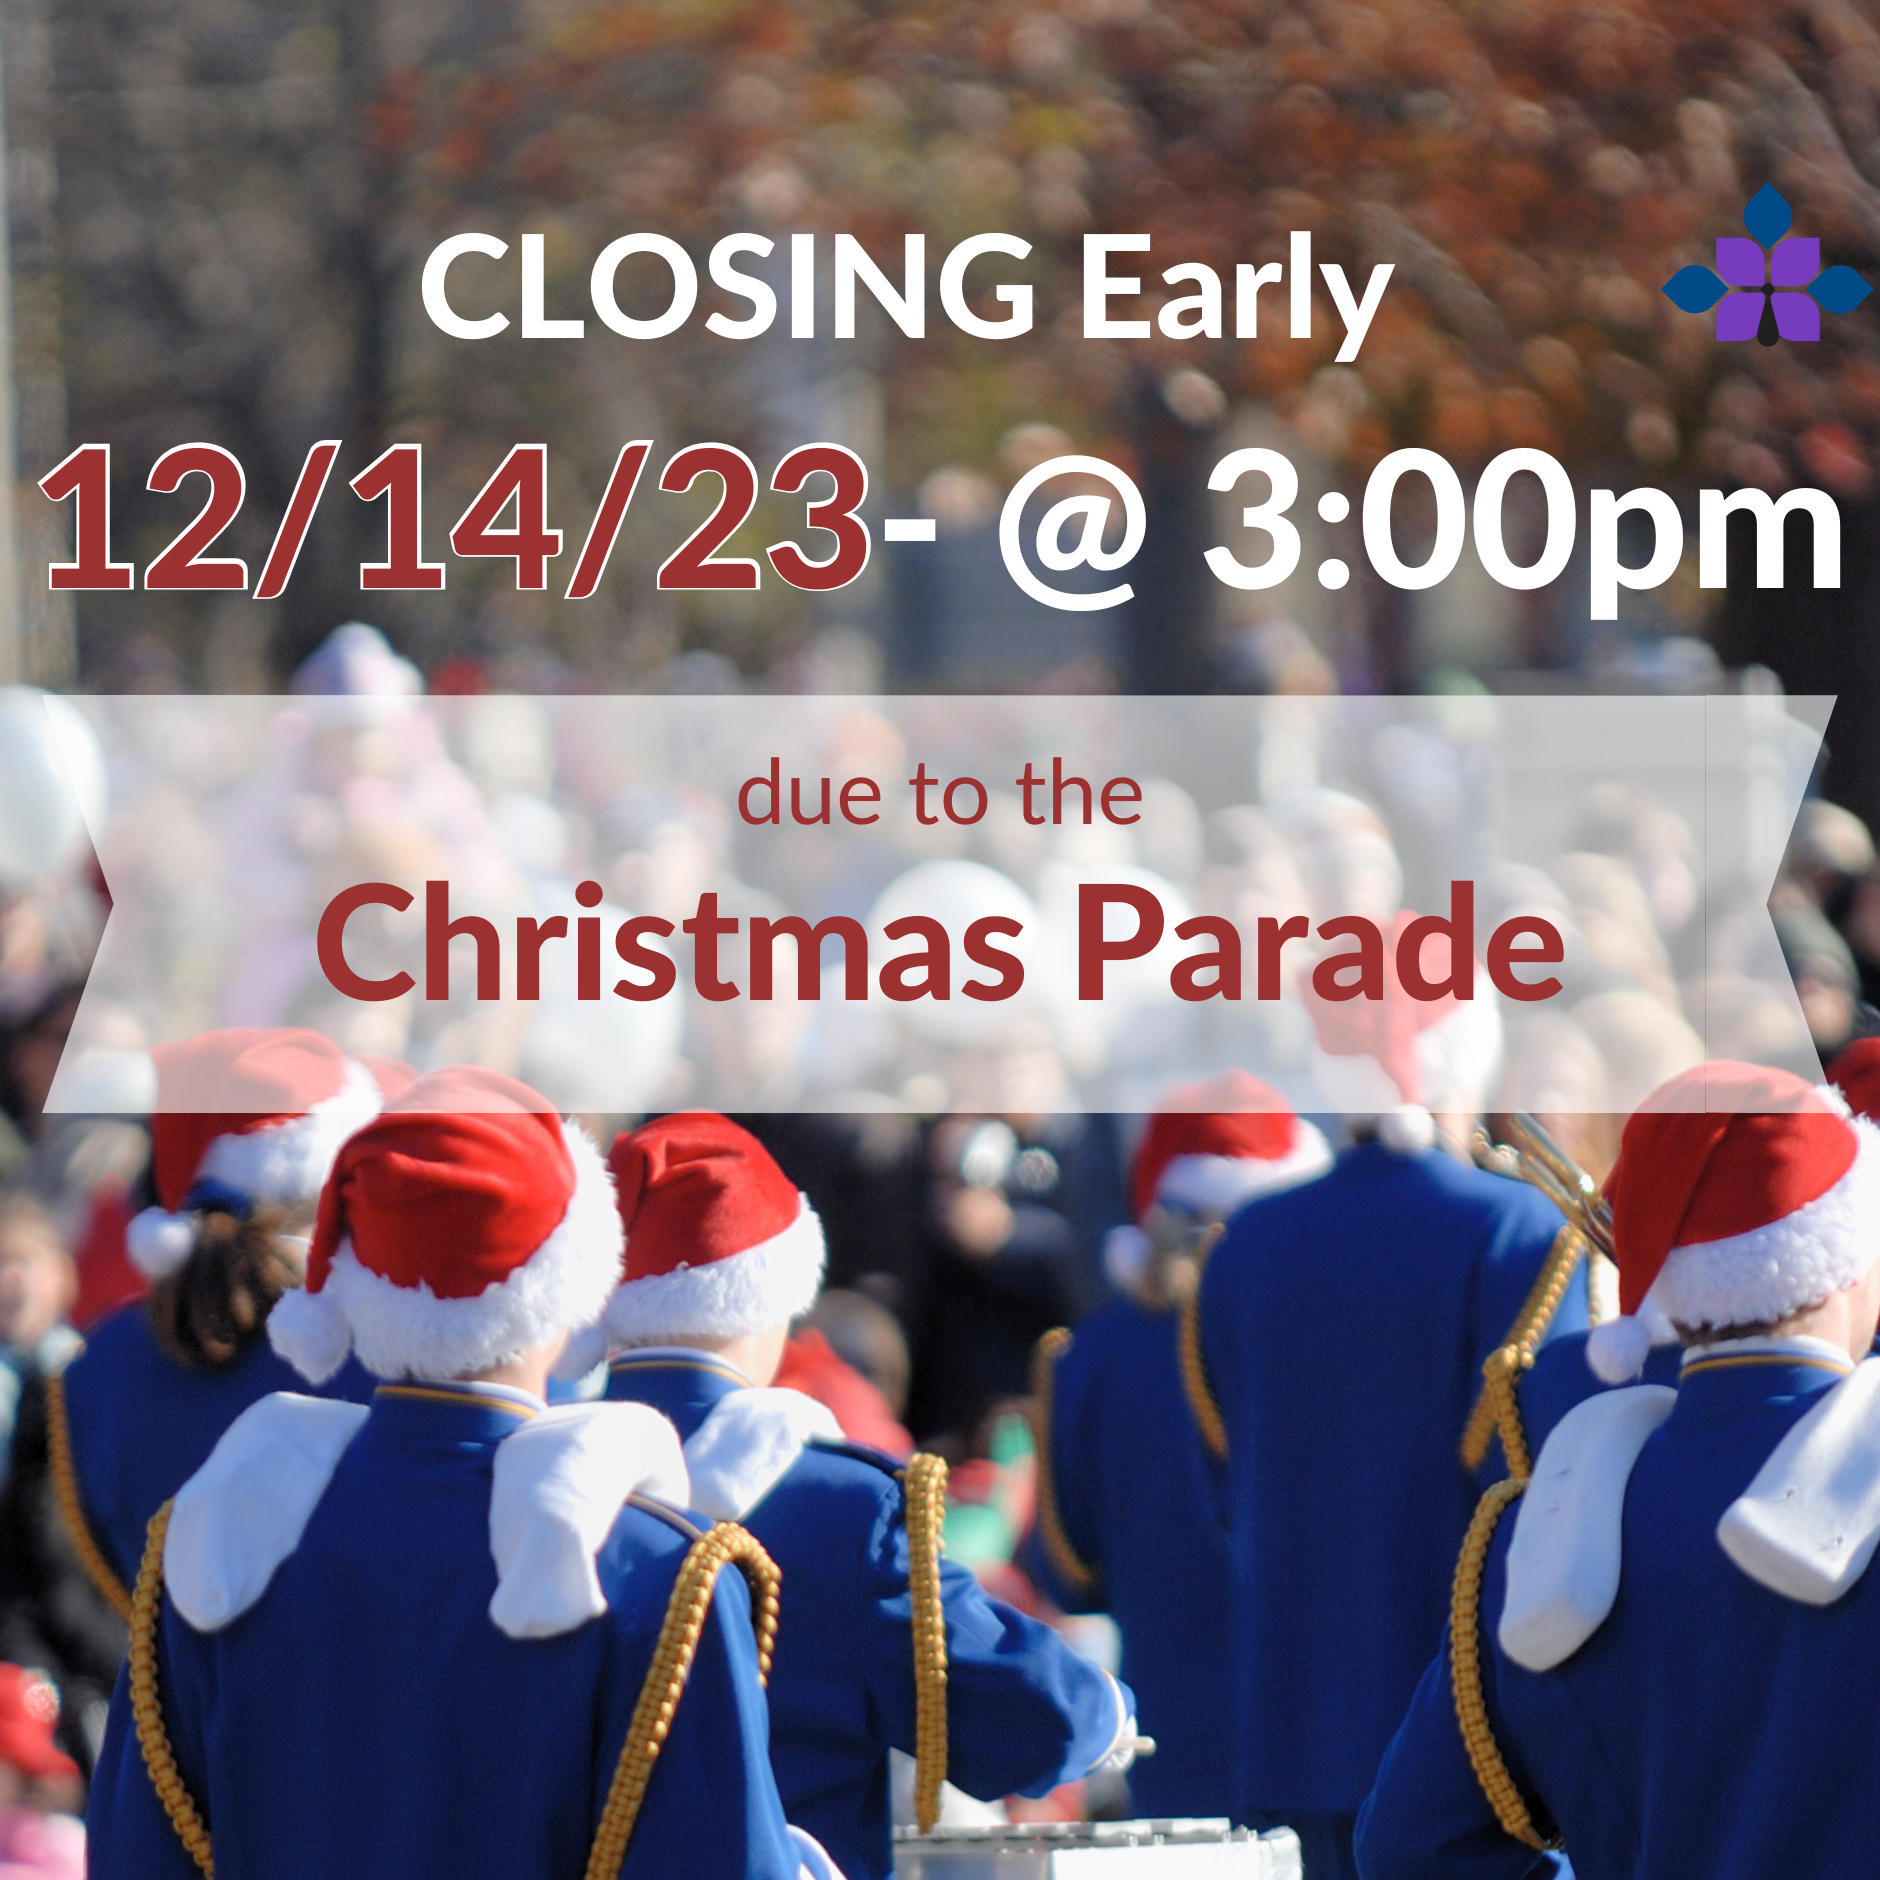 Closing Early on 12/14/23 at 4 p.m. for the Christmas Parade.